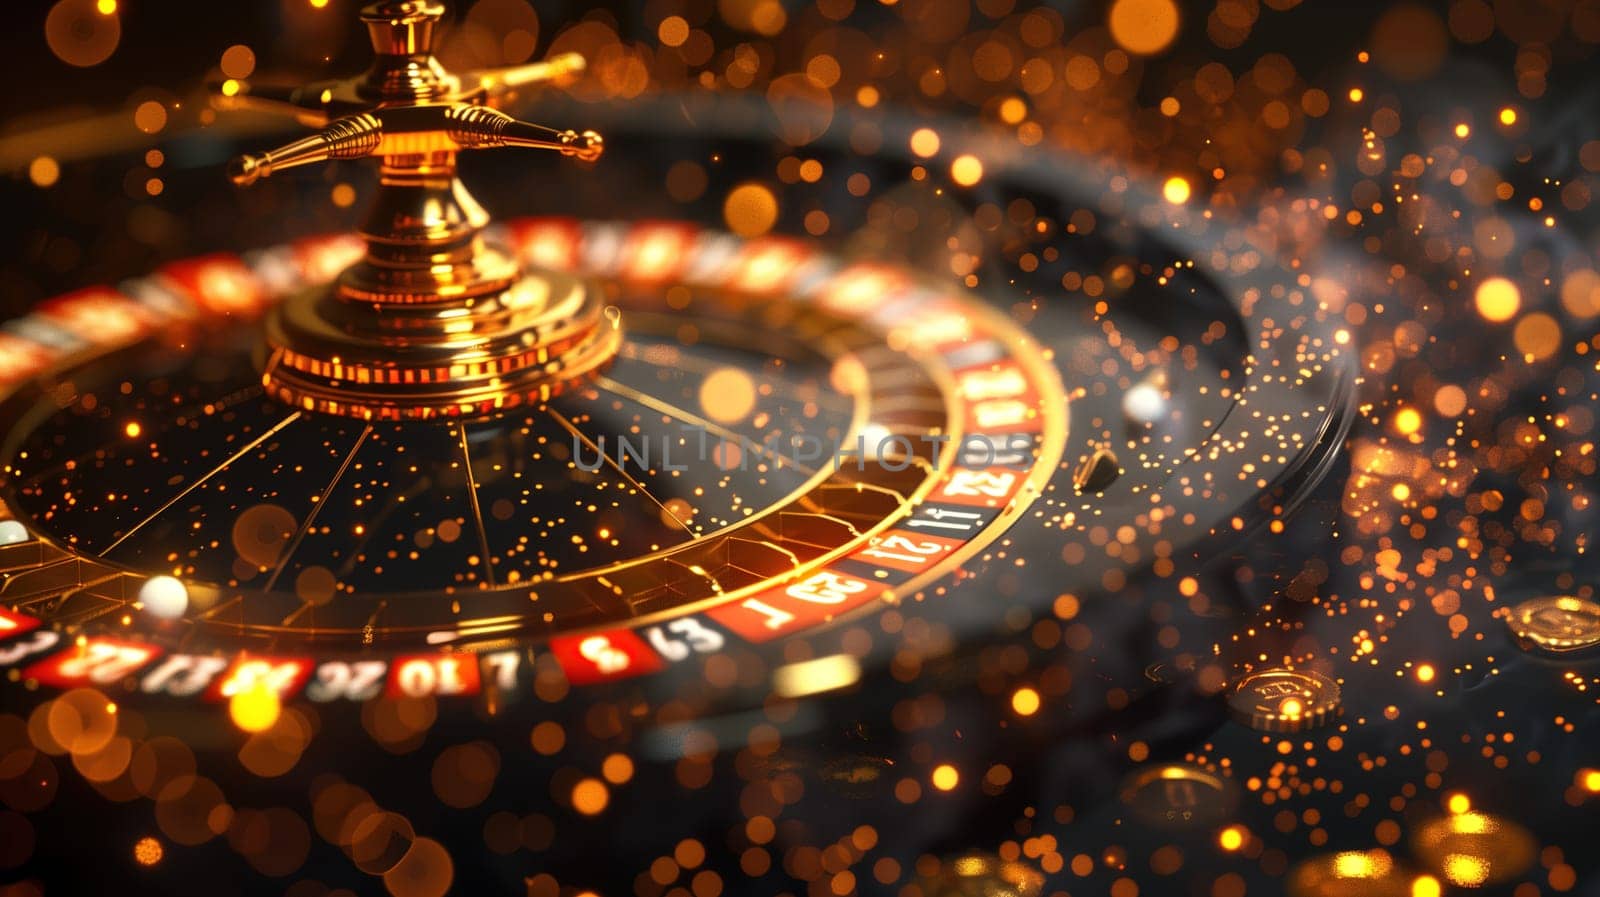 Elegant Casino Roulette Wheel in Action Captured With Floating Golden Sparkles by TRMK